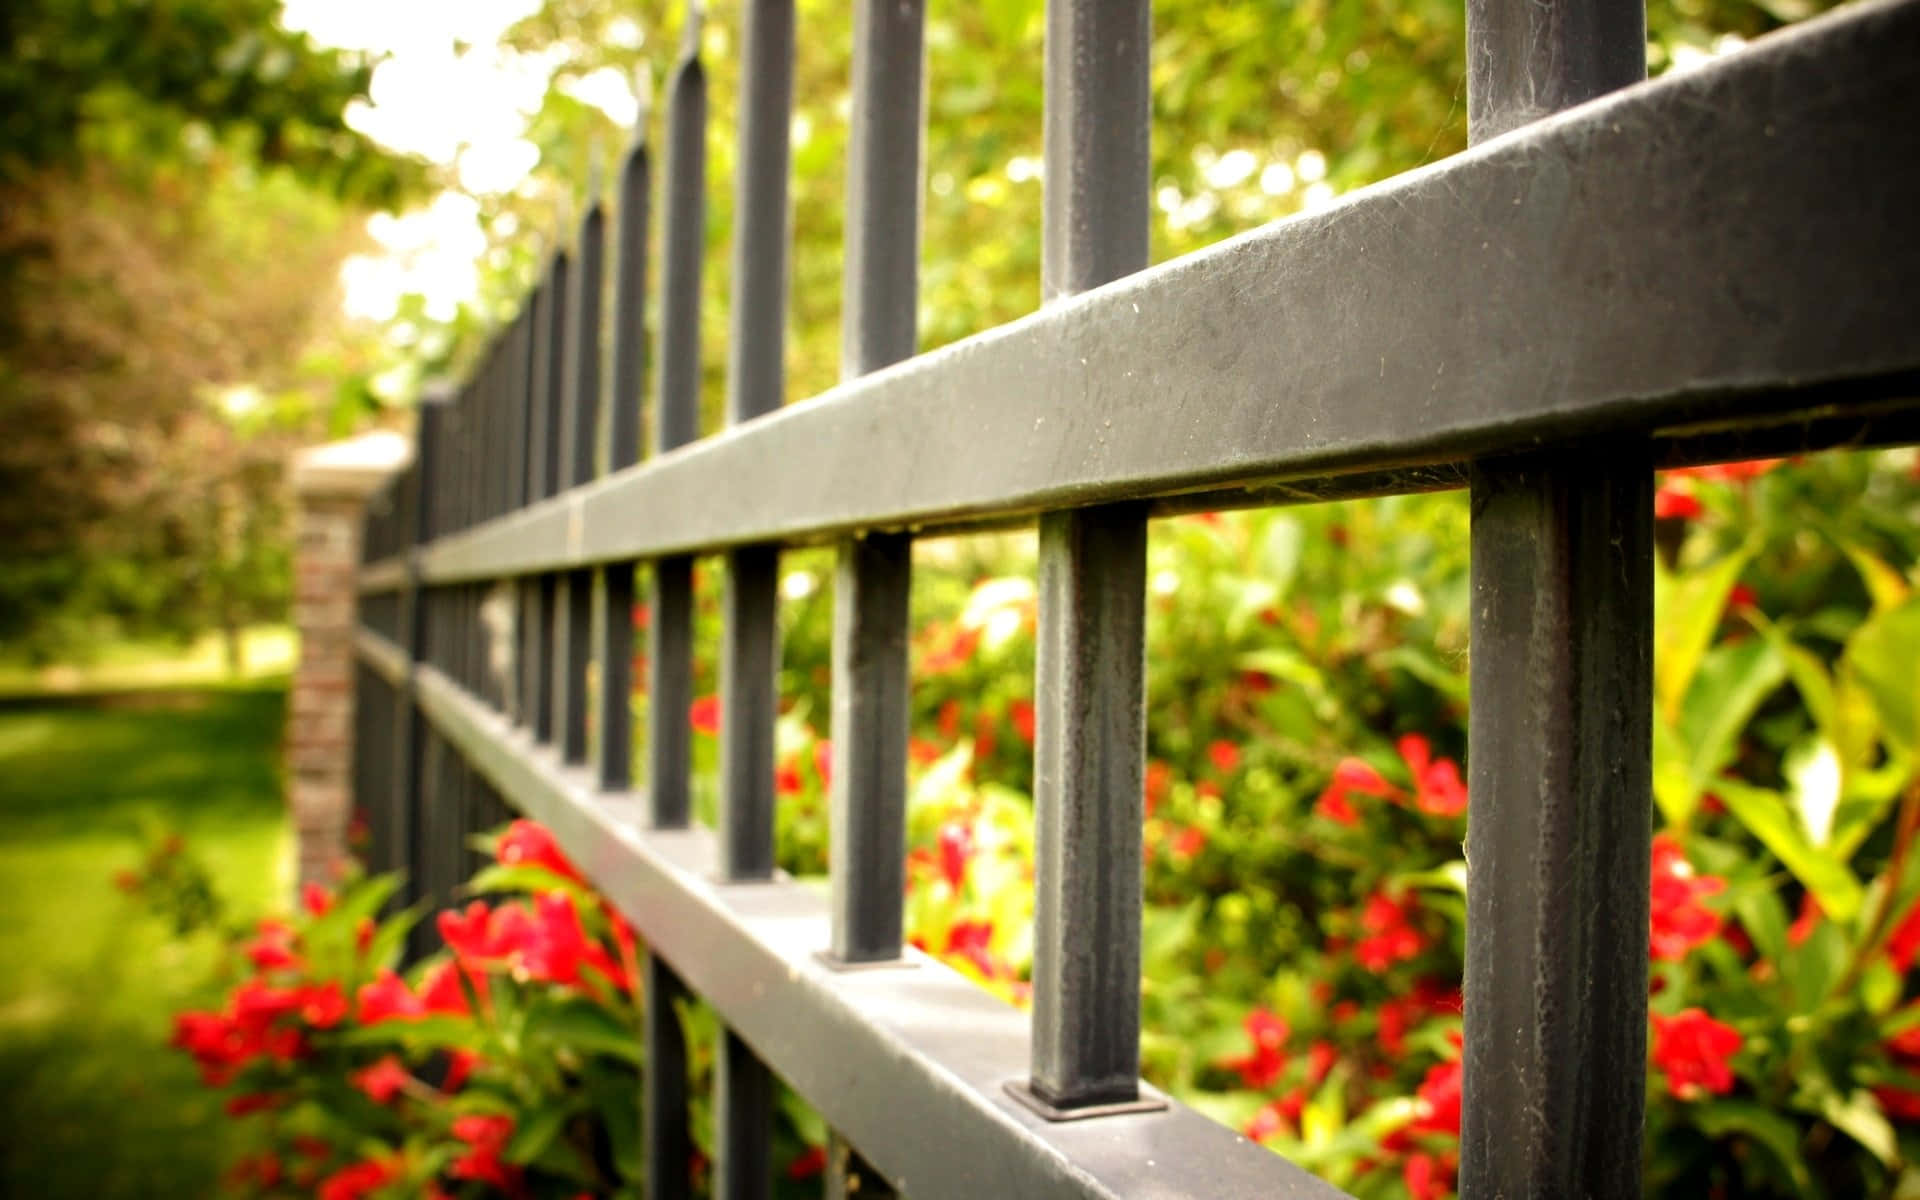 Closeup view of a brightly colored fence